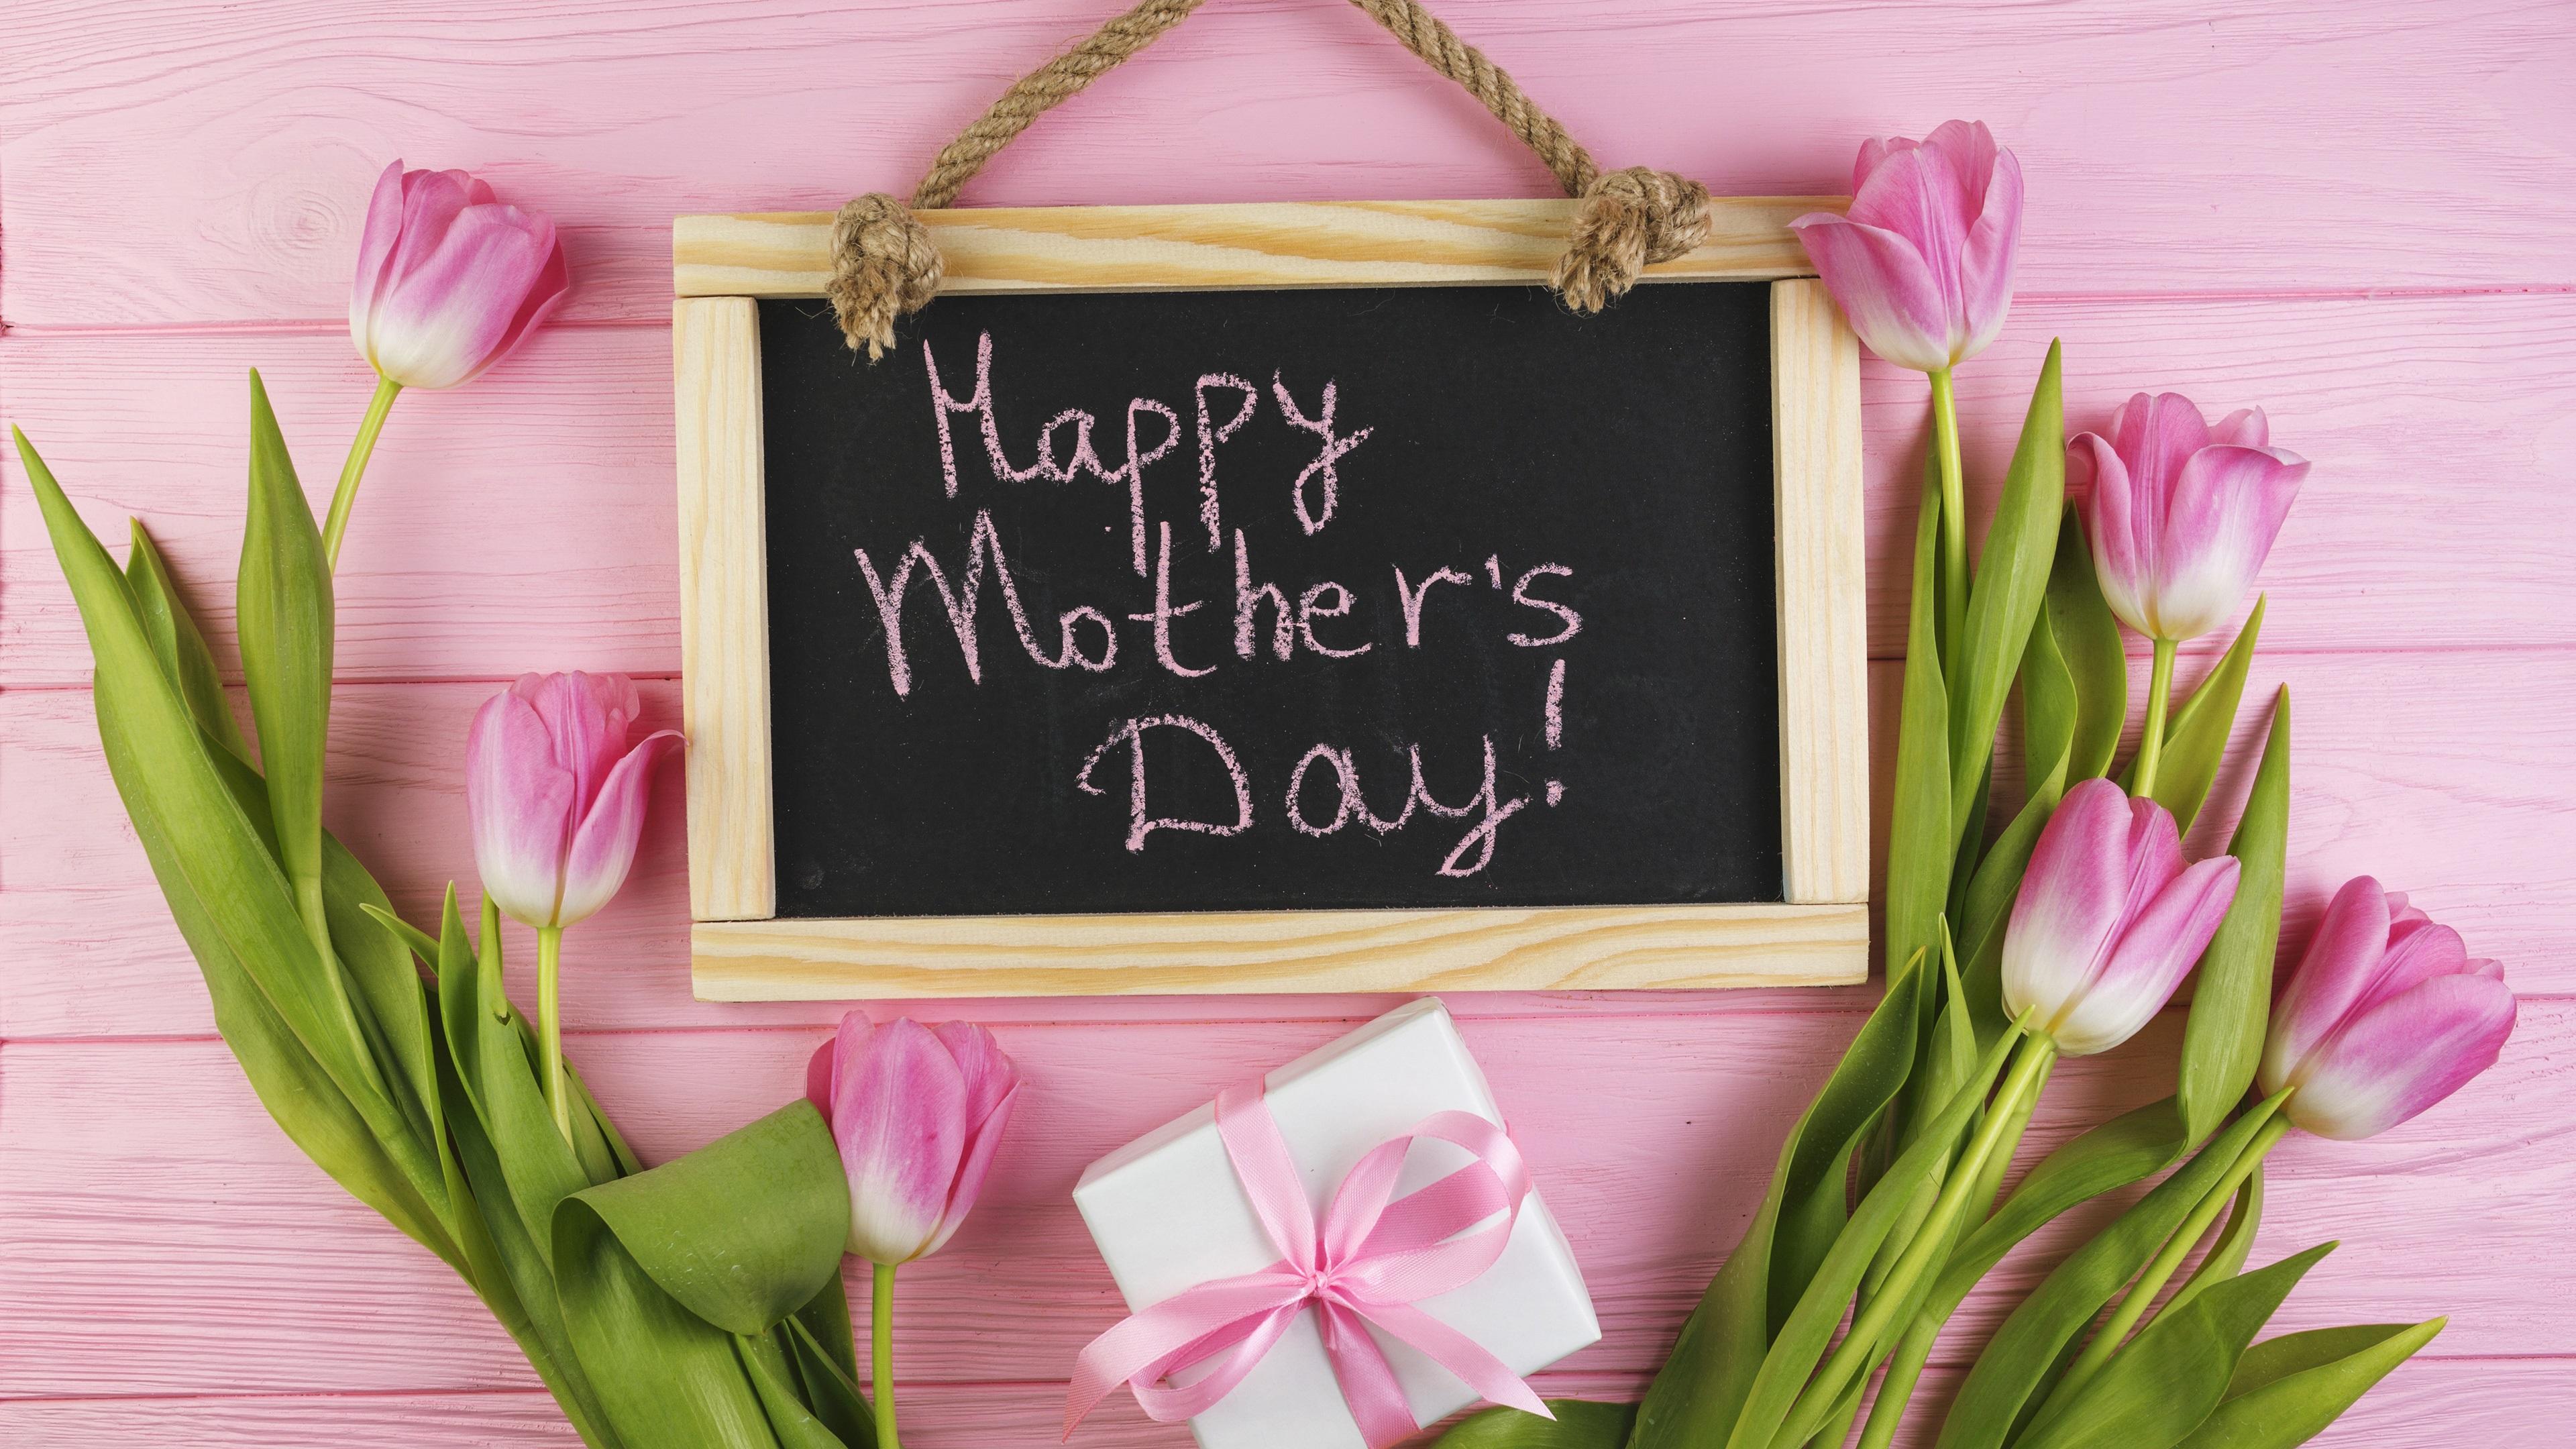 Wallpaper Happy Mother's Day, pink tulips, gift 3840x2160 UHD 4K Picture, Image